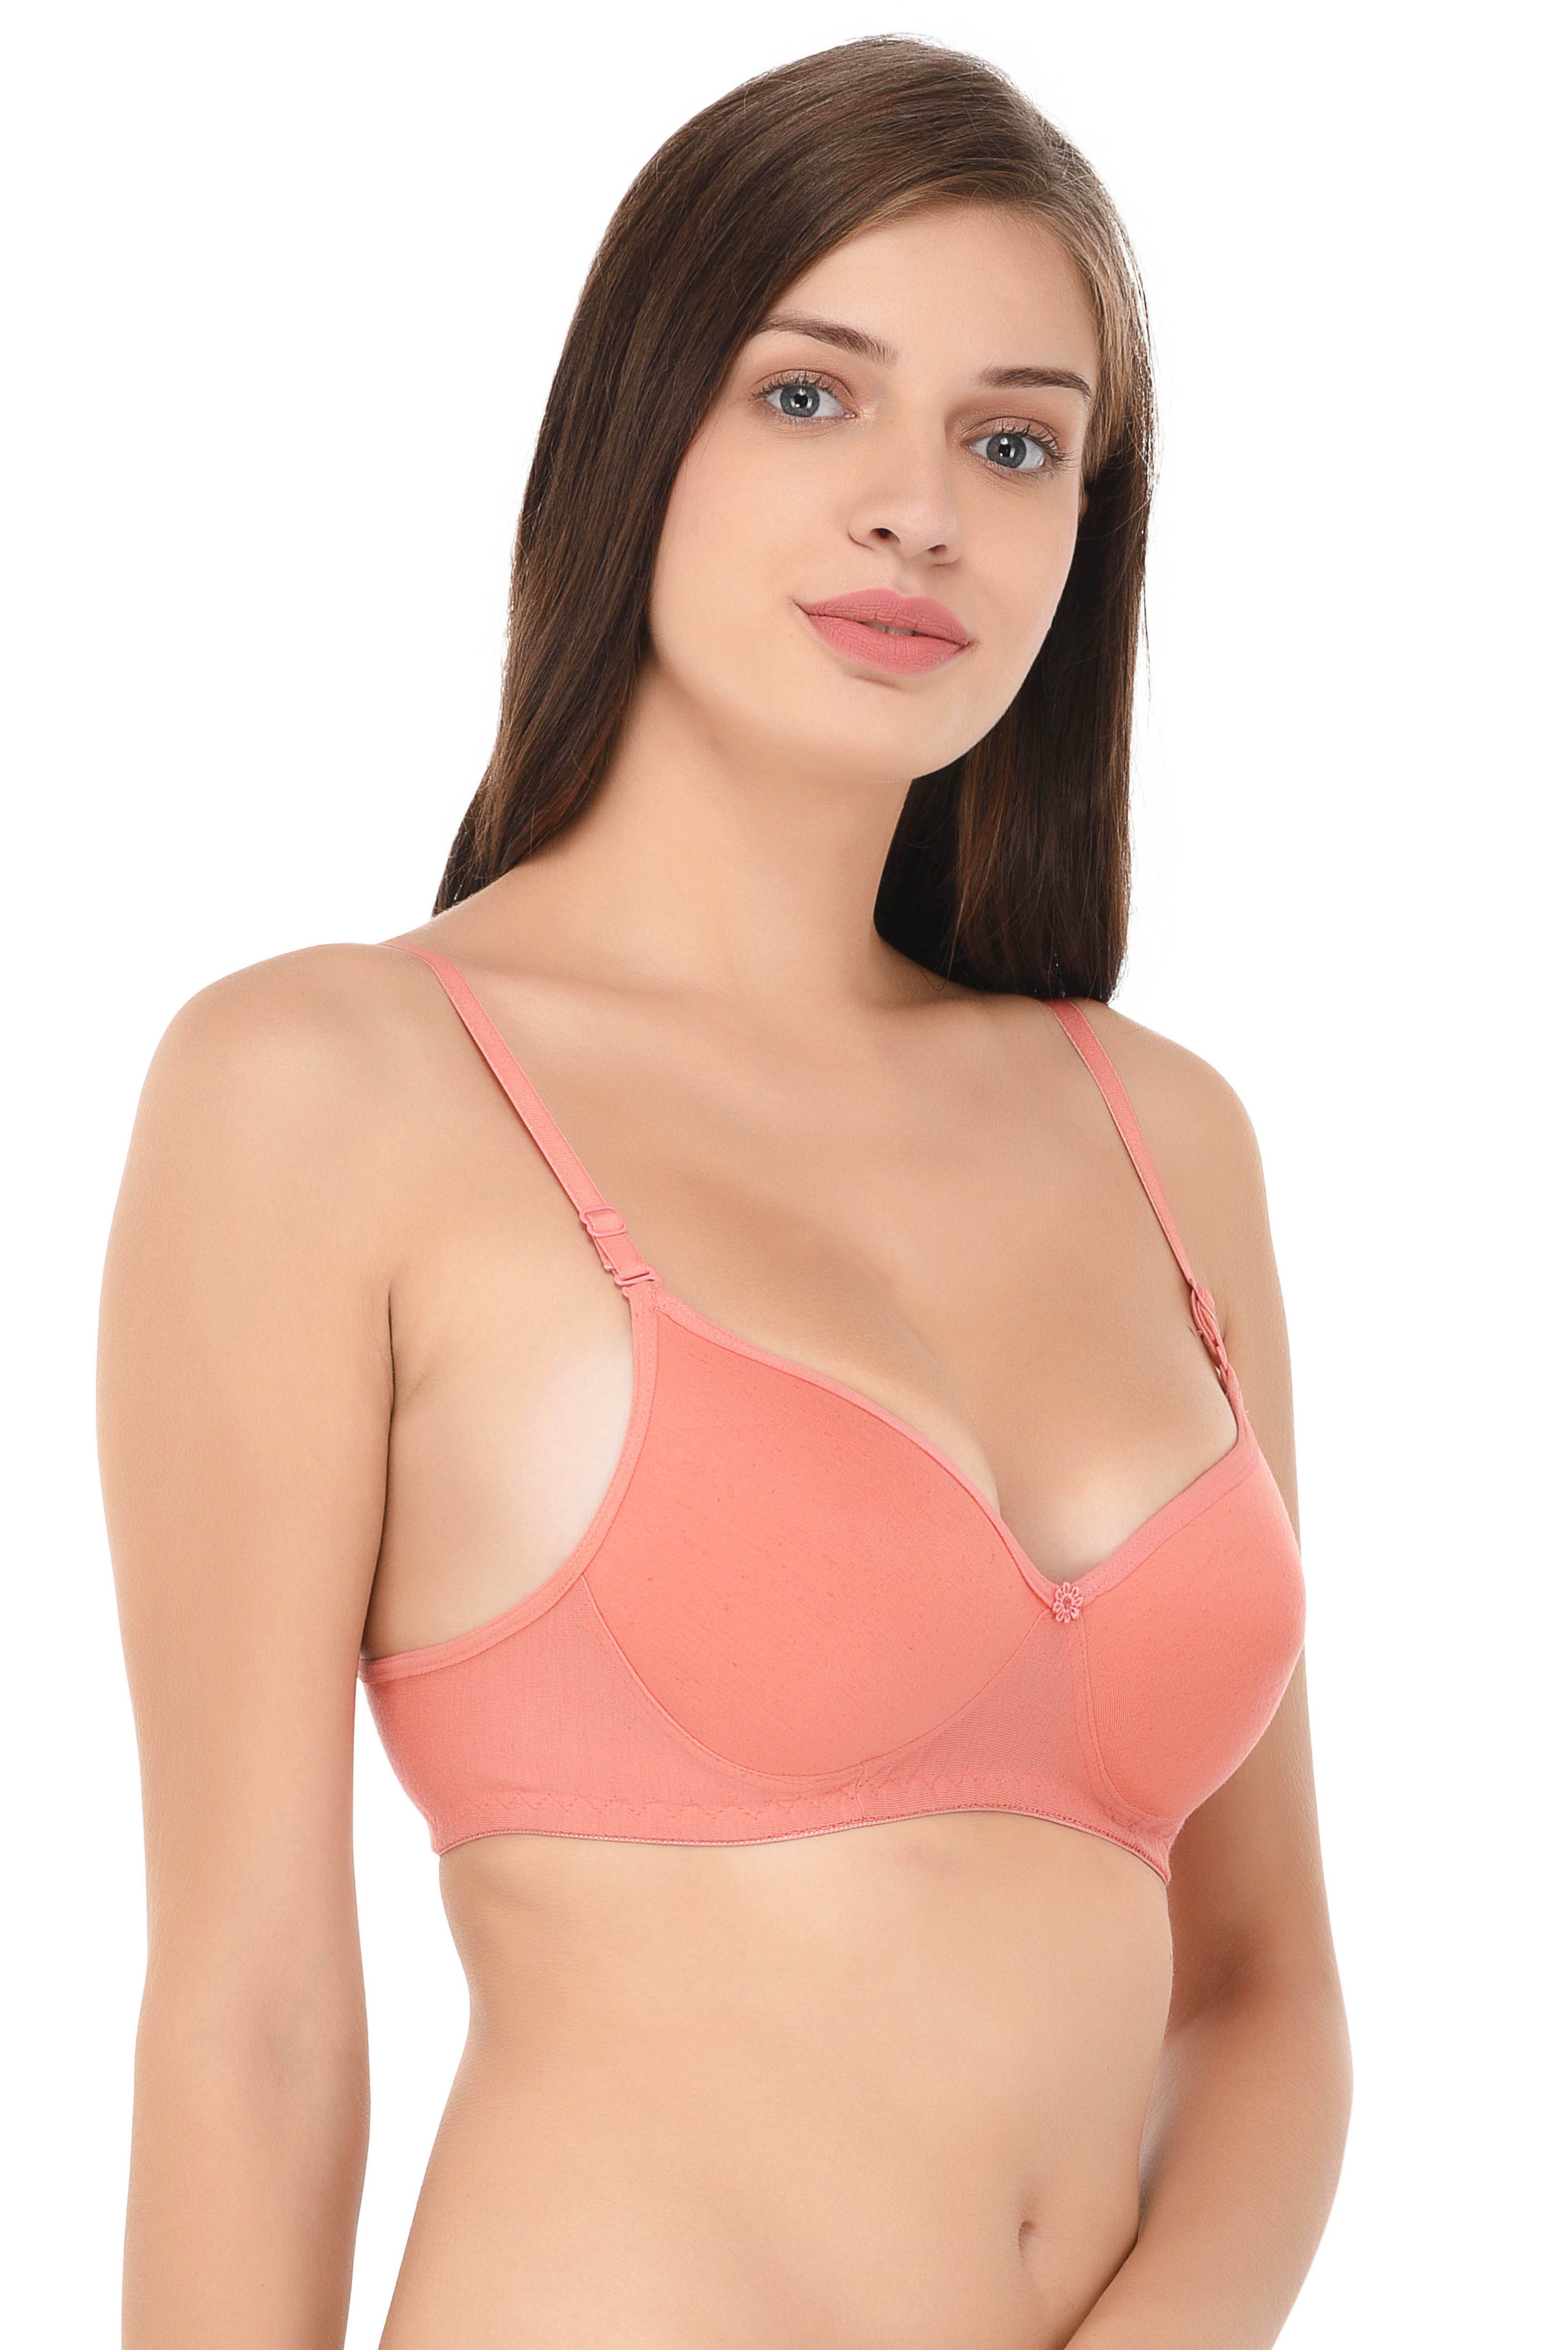 Buy Lizaray Cotton Push Up Bra Orange Online At Best Prices In India Snapdeal